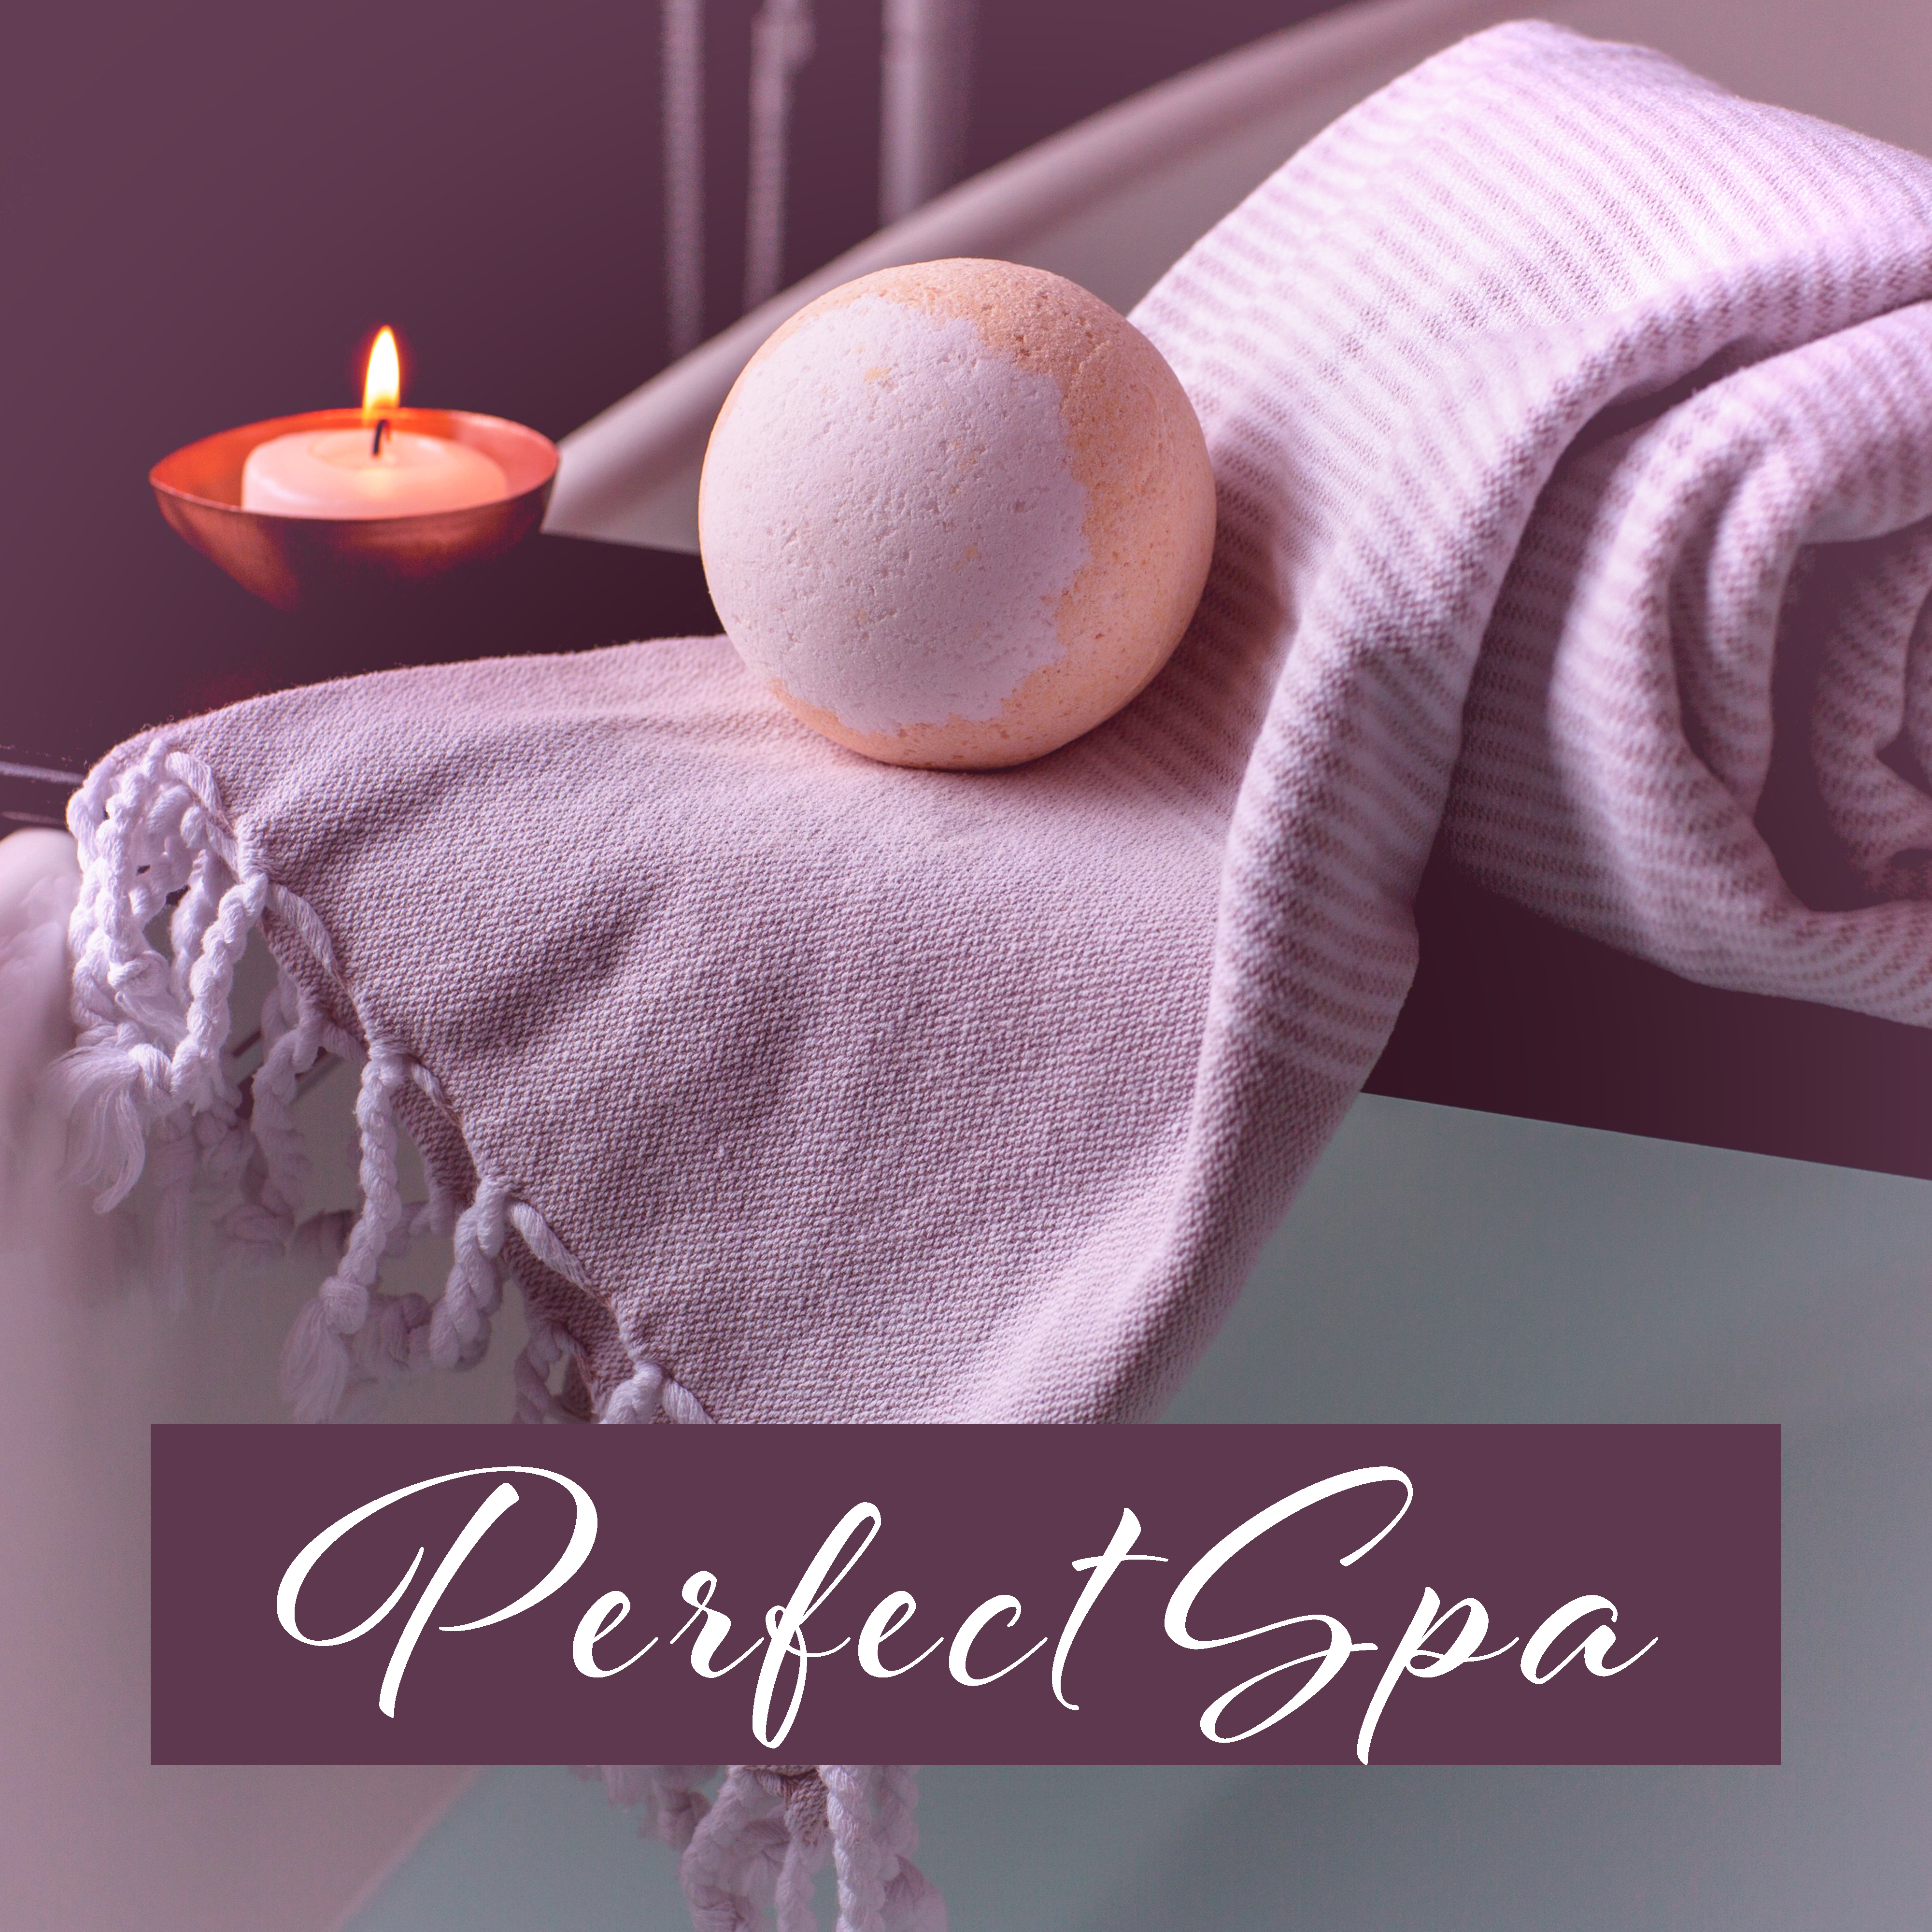 Perfect Spa – Soft Sounds for Relaxation, Wellness, Calm Down, Relaxing Music Therapy, Inner Zen